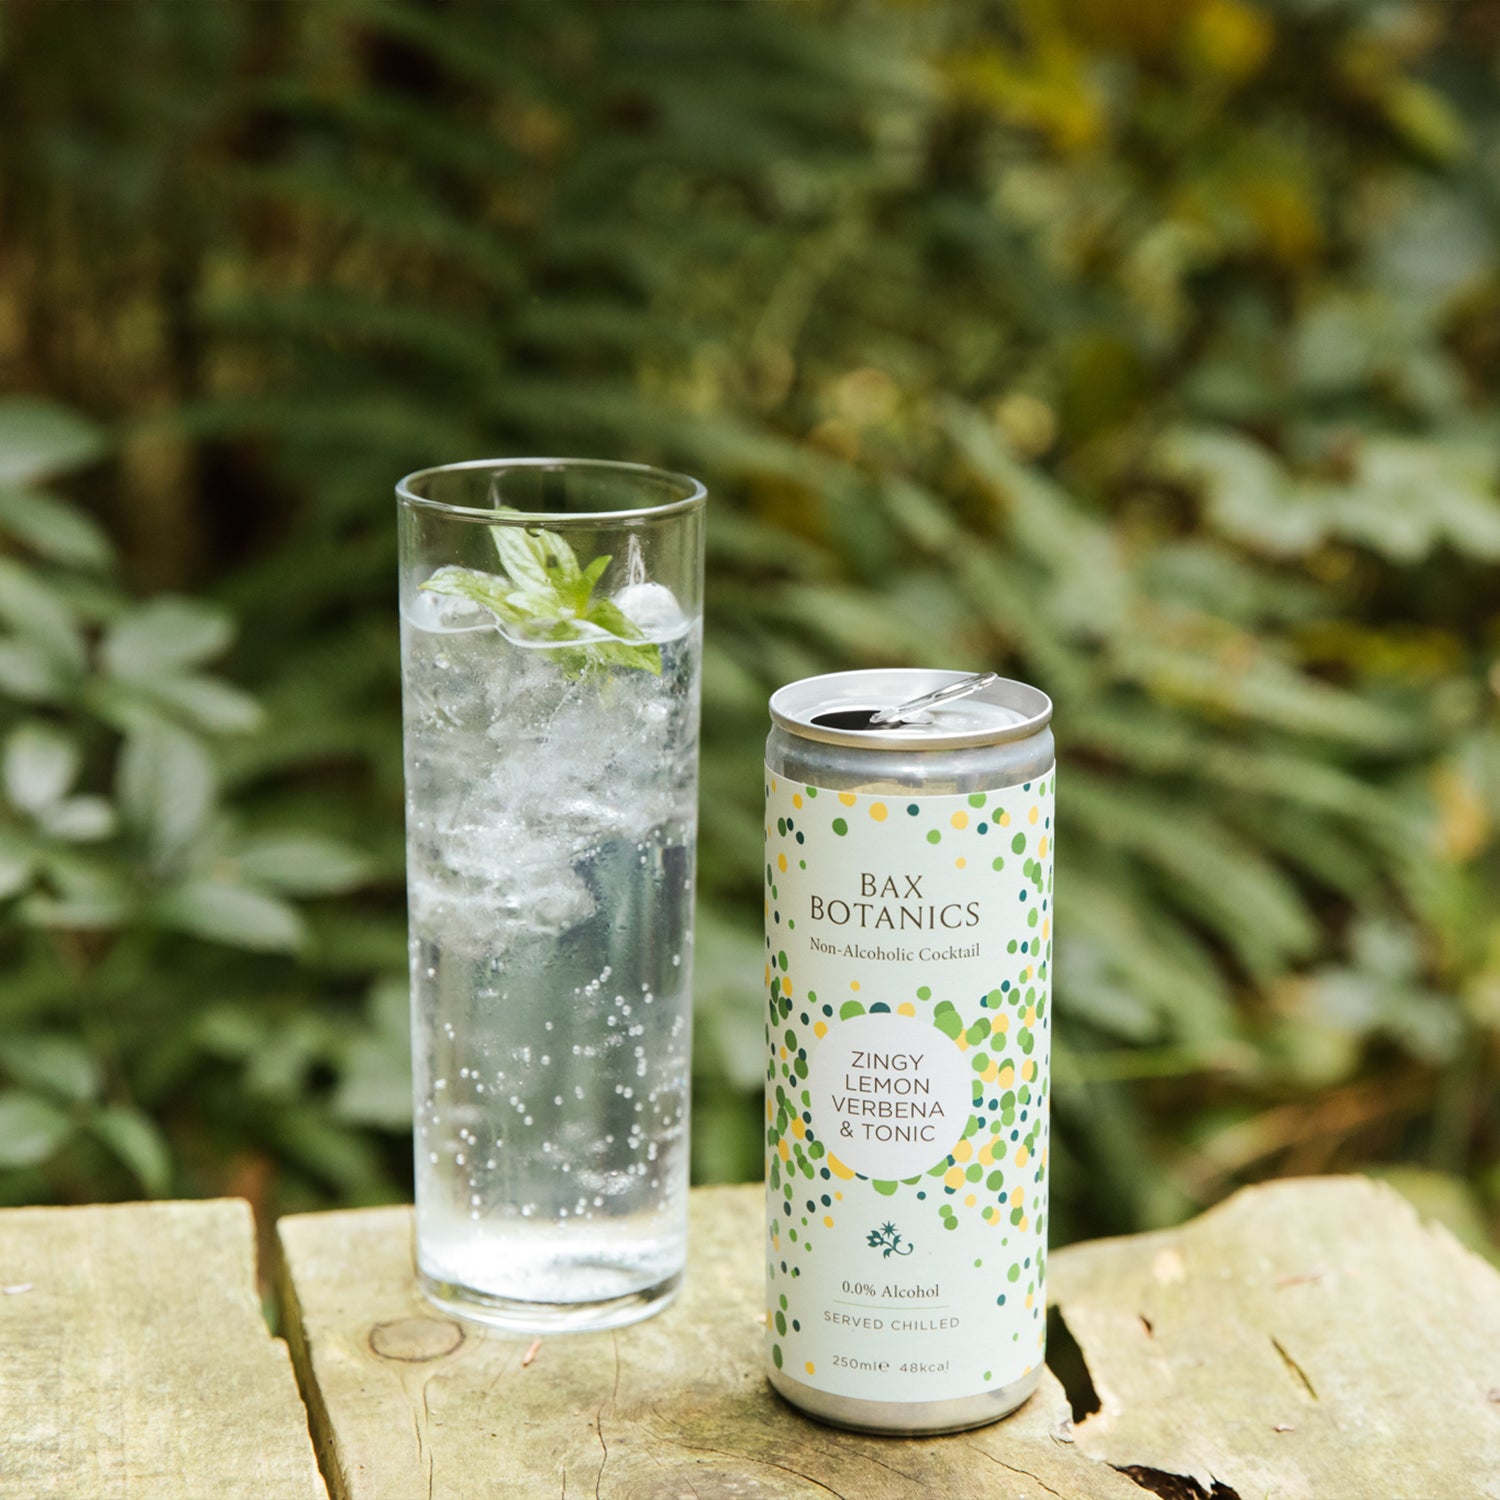 Non-alcoholic gin & tonic ready to drink